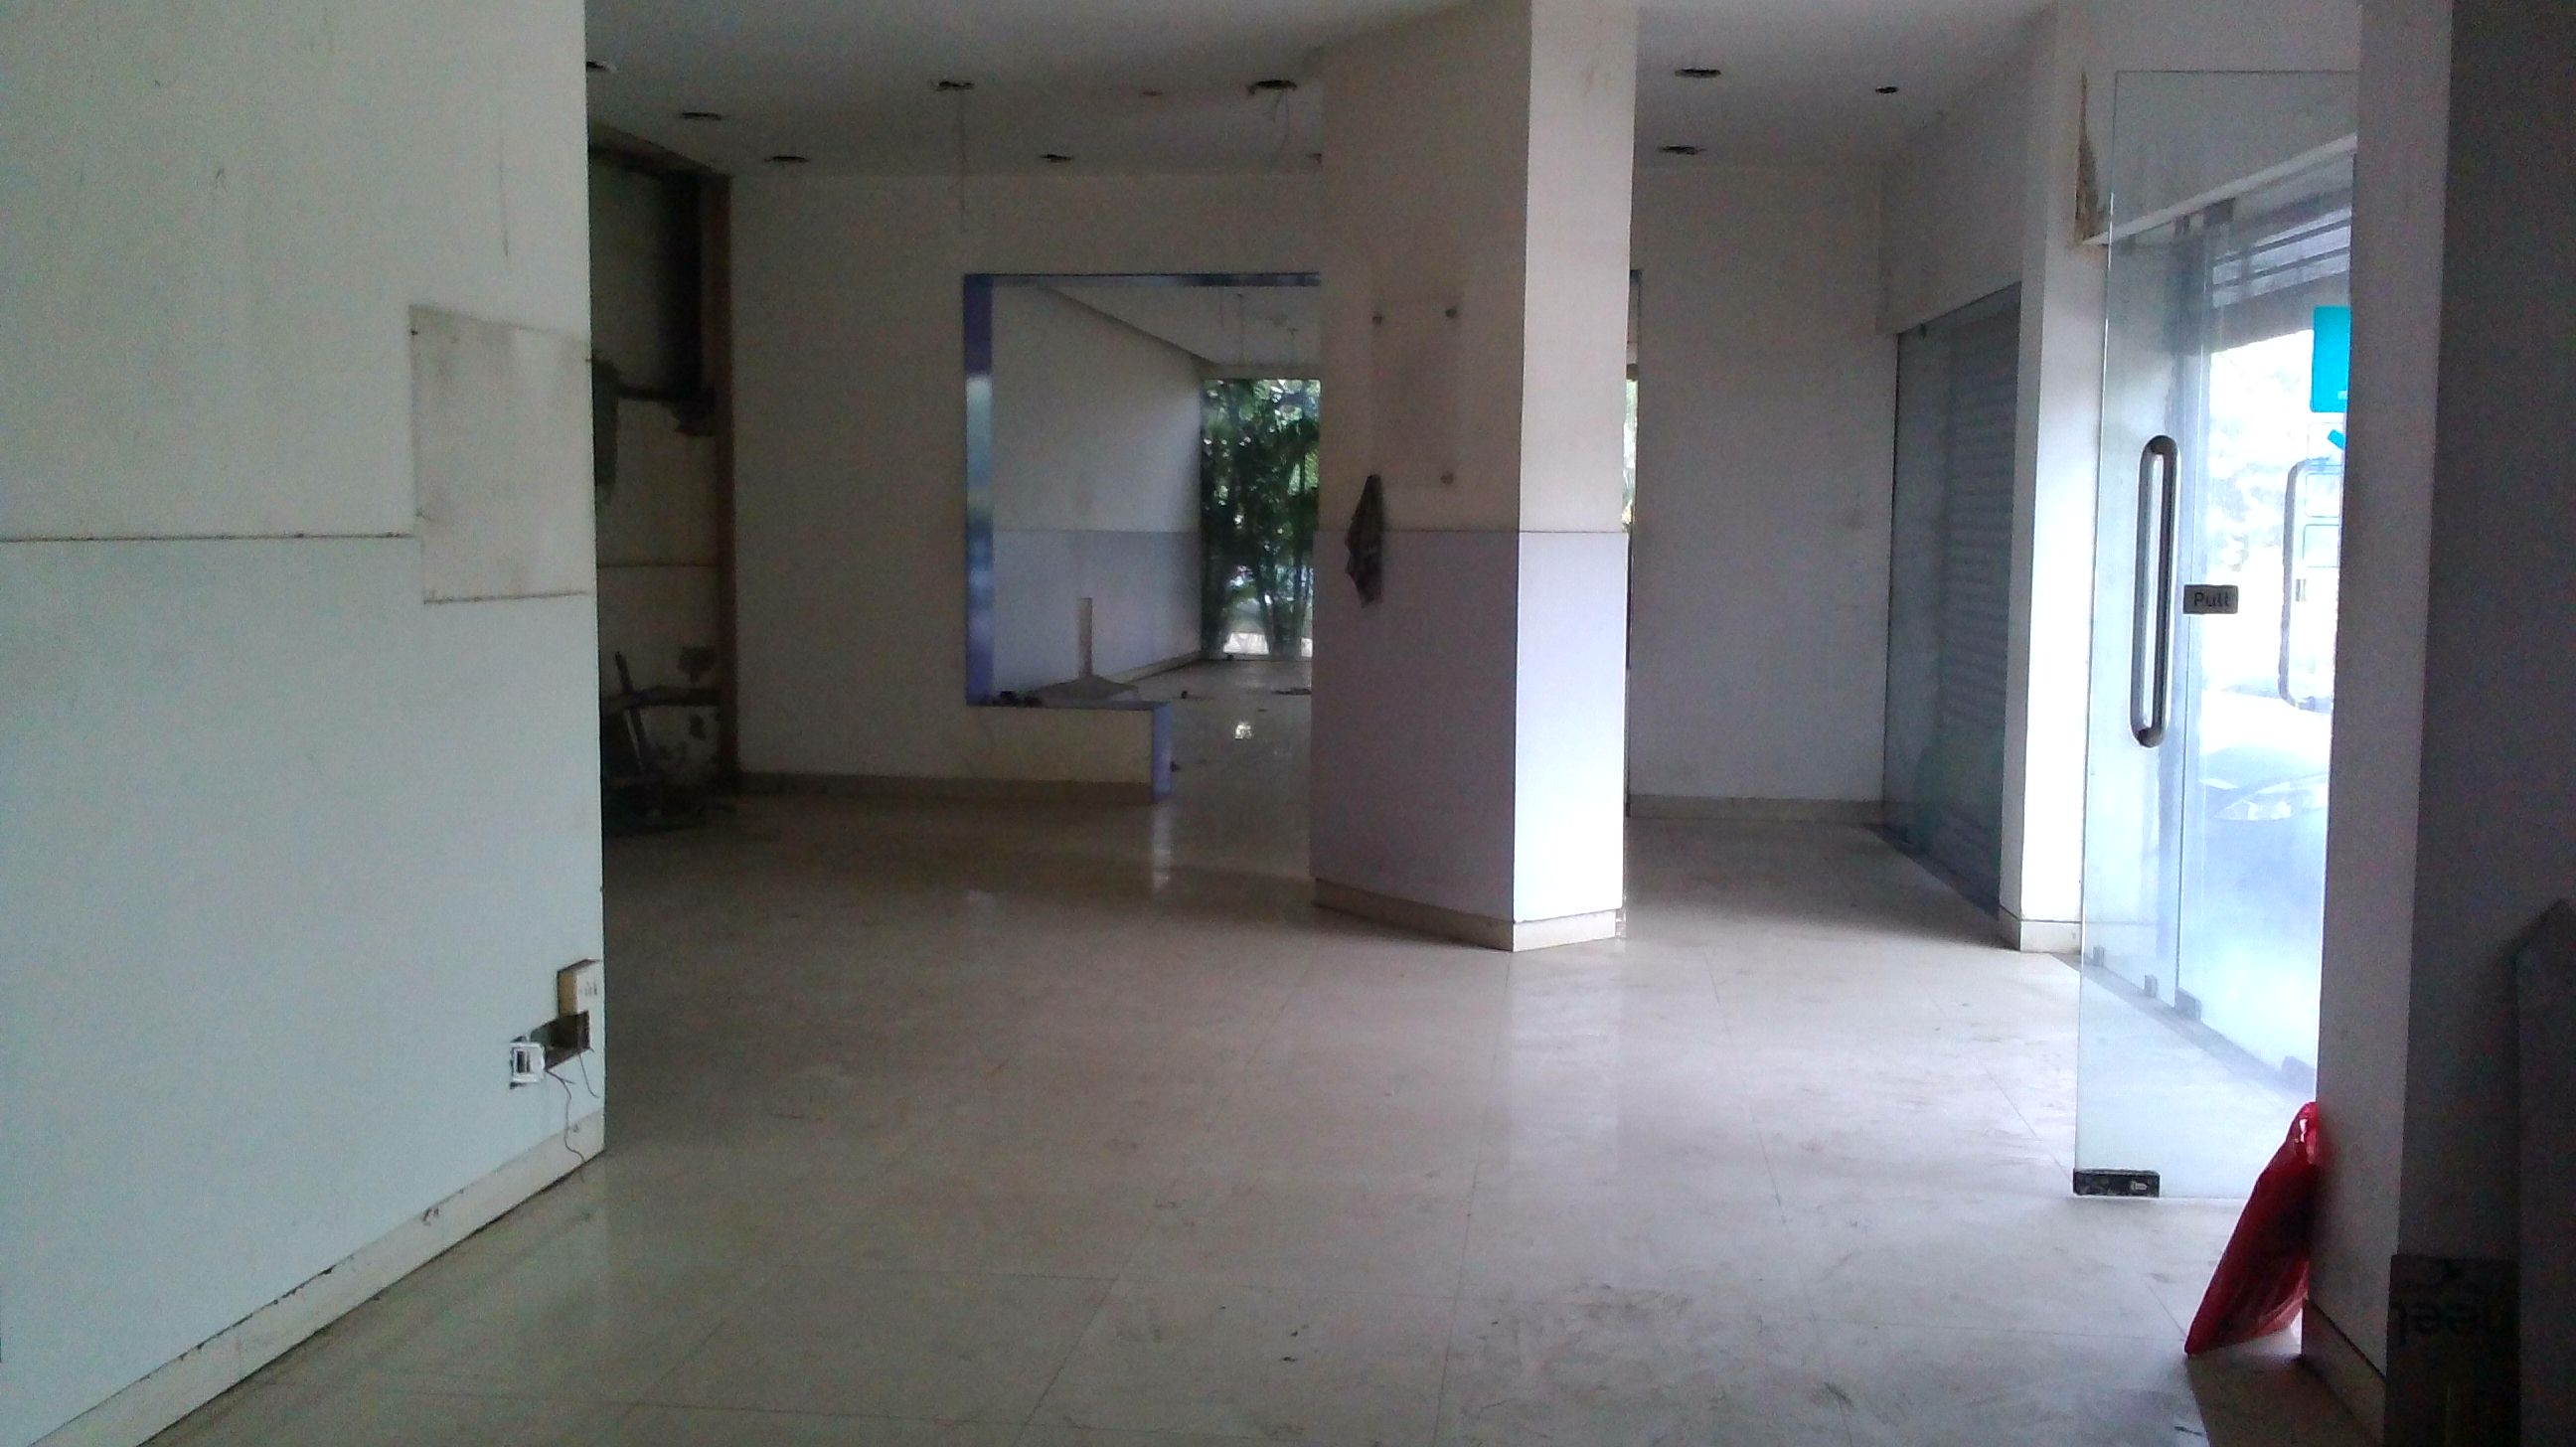 Commercial Shops for Rent in Solitaire Tower, Ghodbunder Road. Near Dosti Imperia, Thane-West, Mumbai